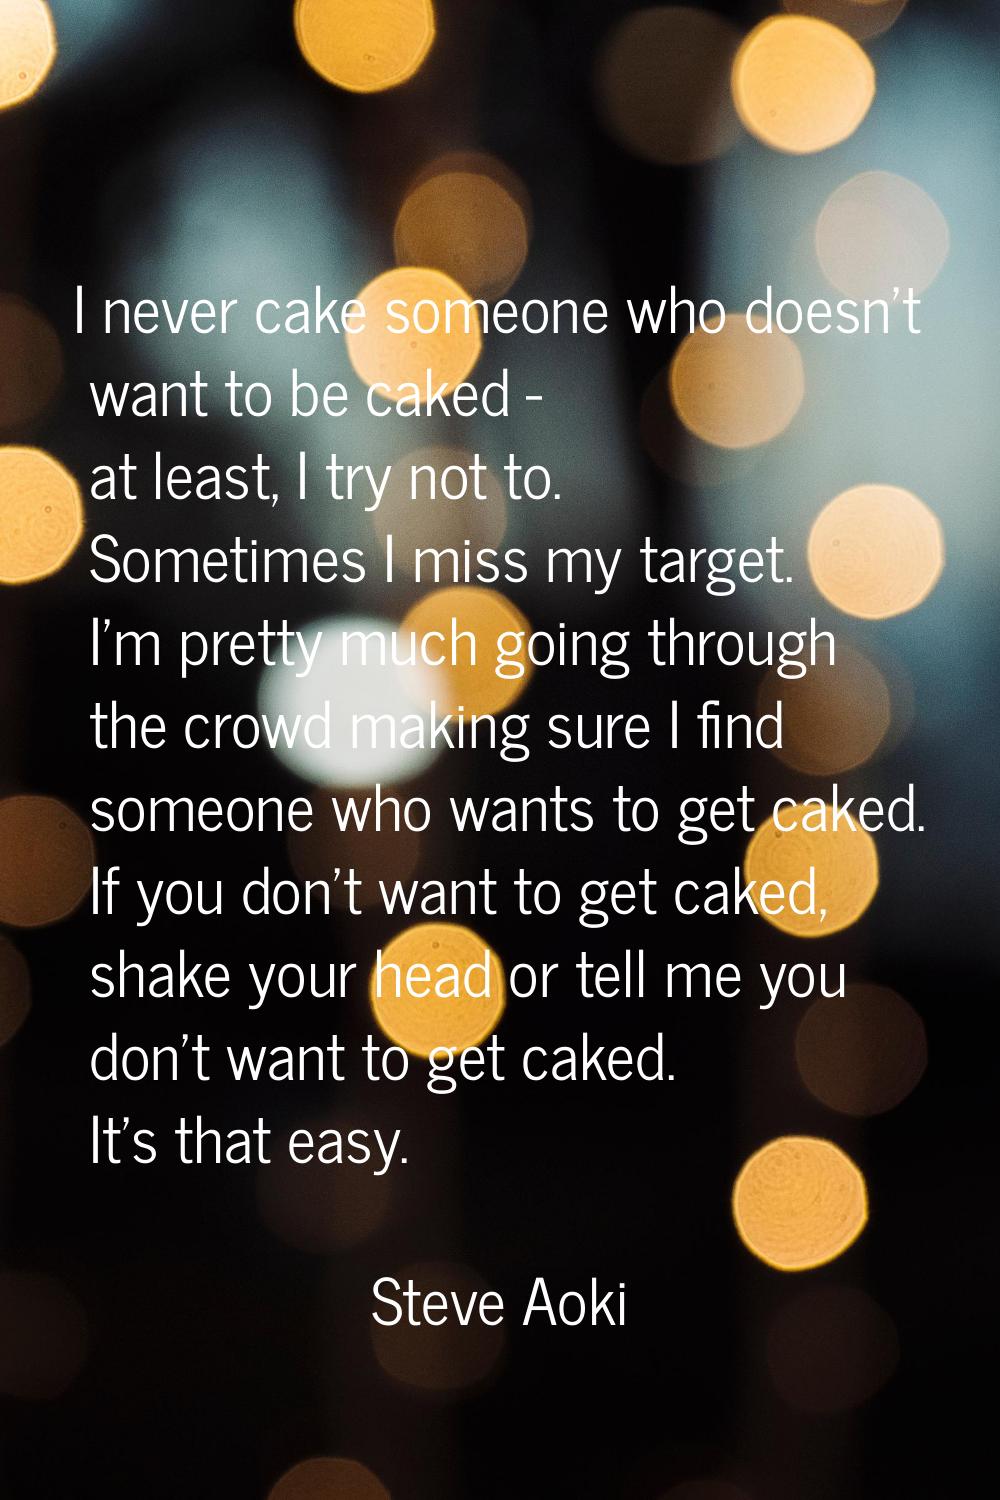 I never cake someone who doesn't want to be caked - at least, I try not to. Sometimes I miss my tar